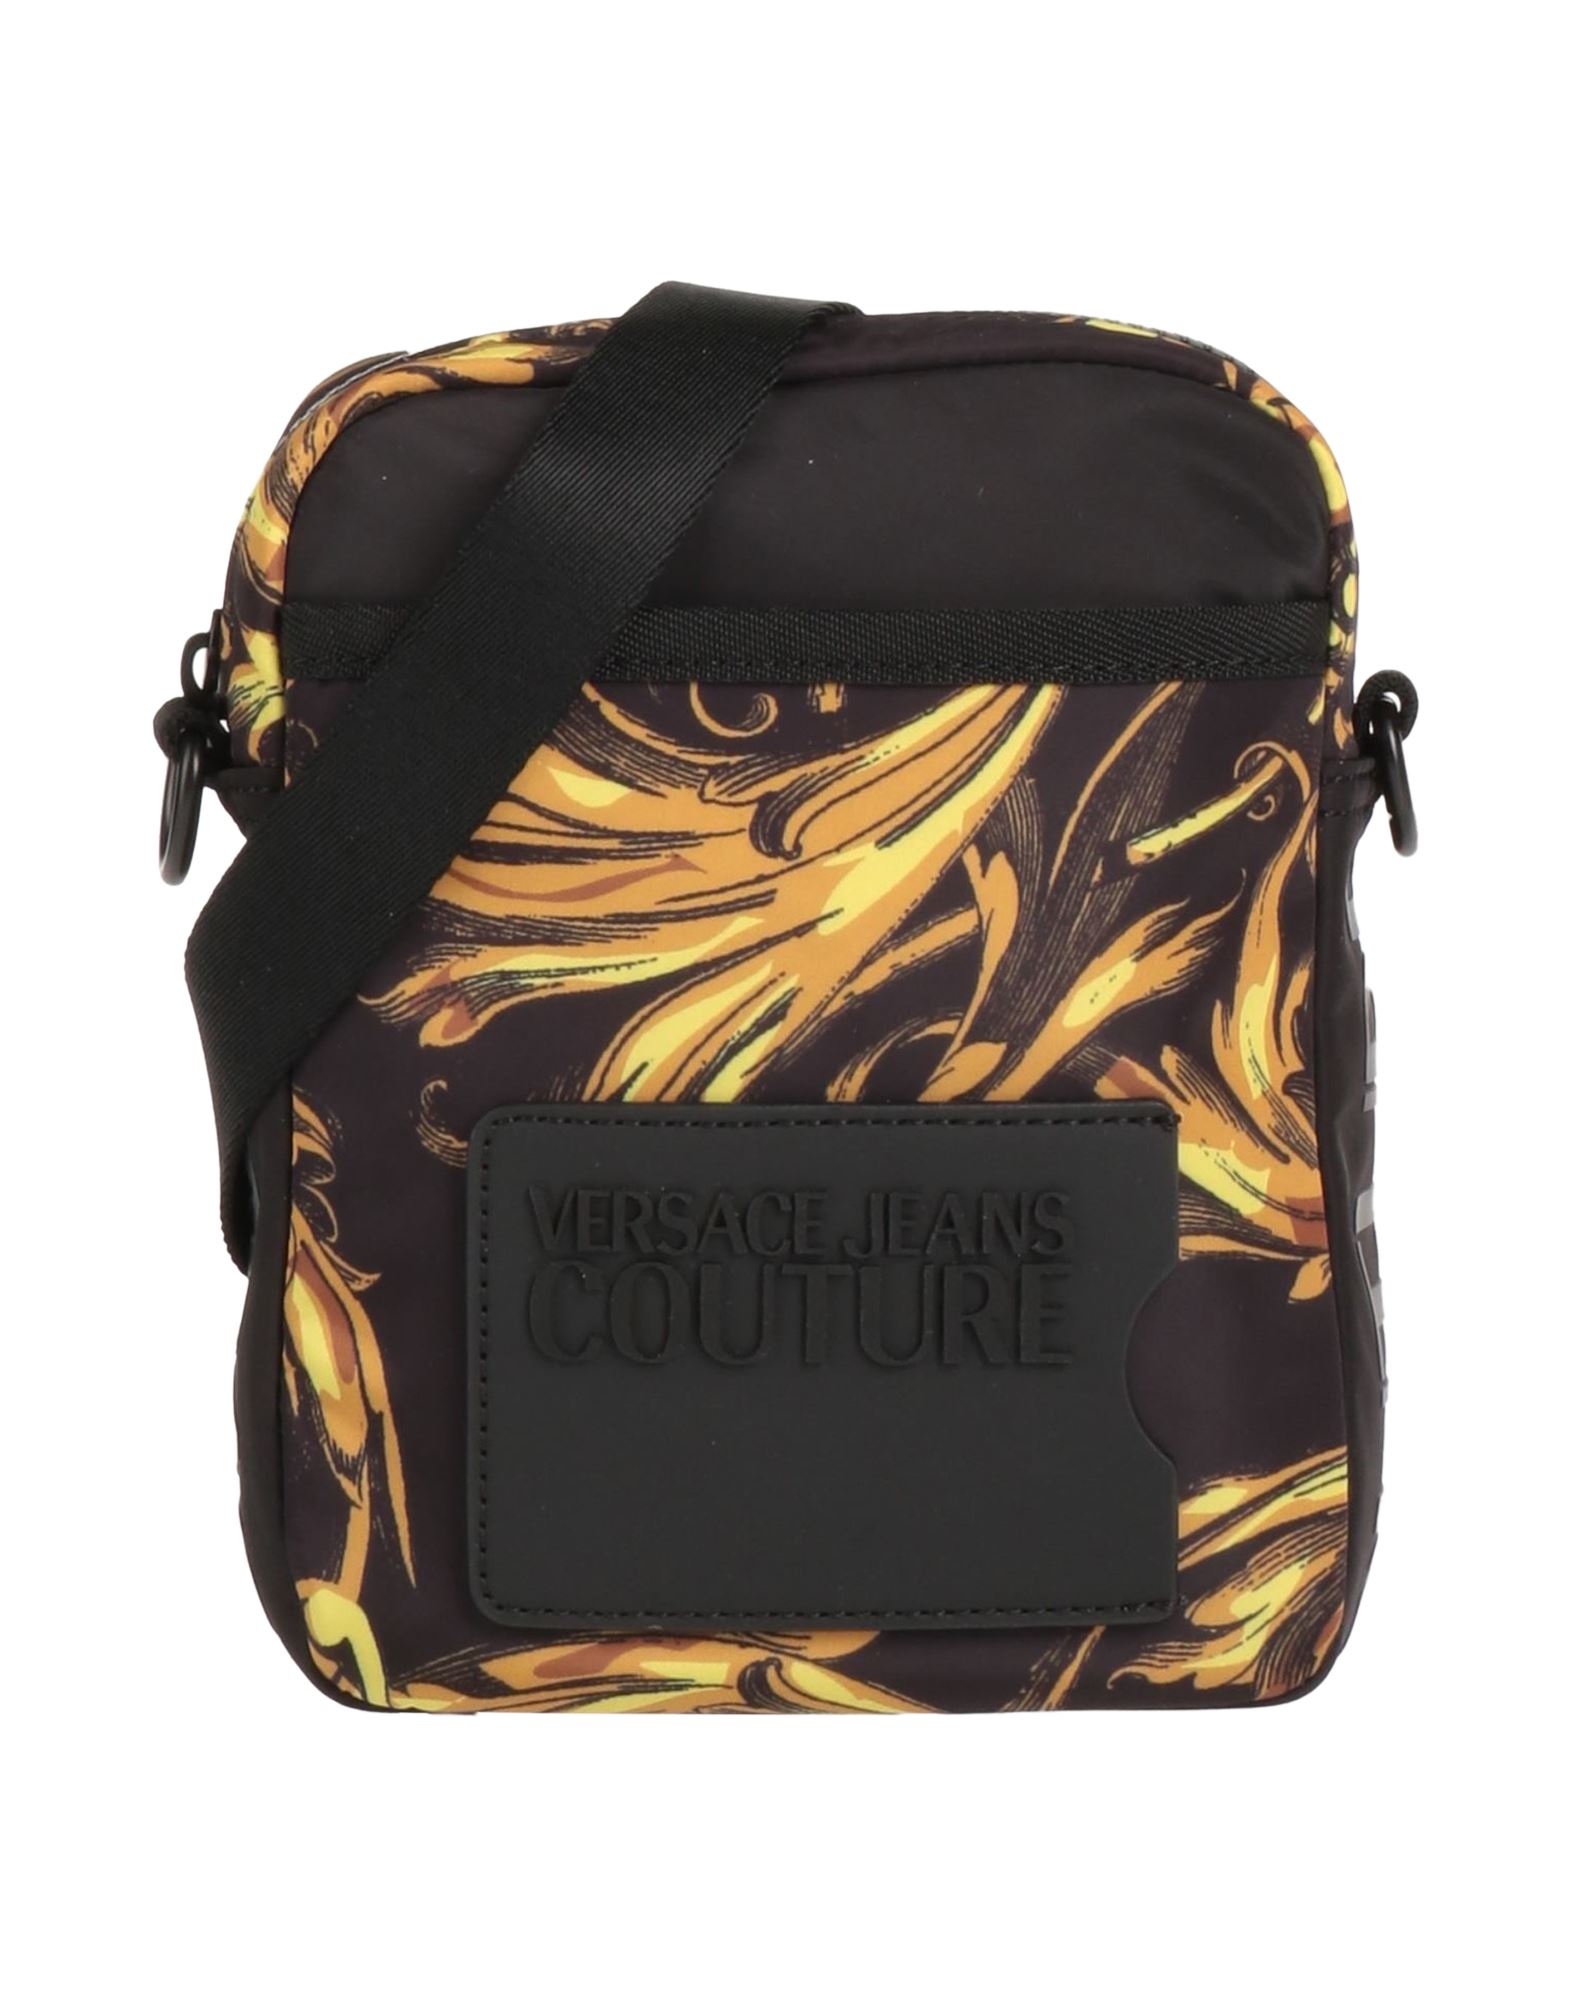 Versace Jeans Couture Handbags In Black